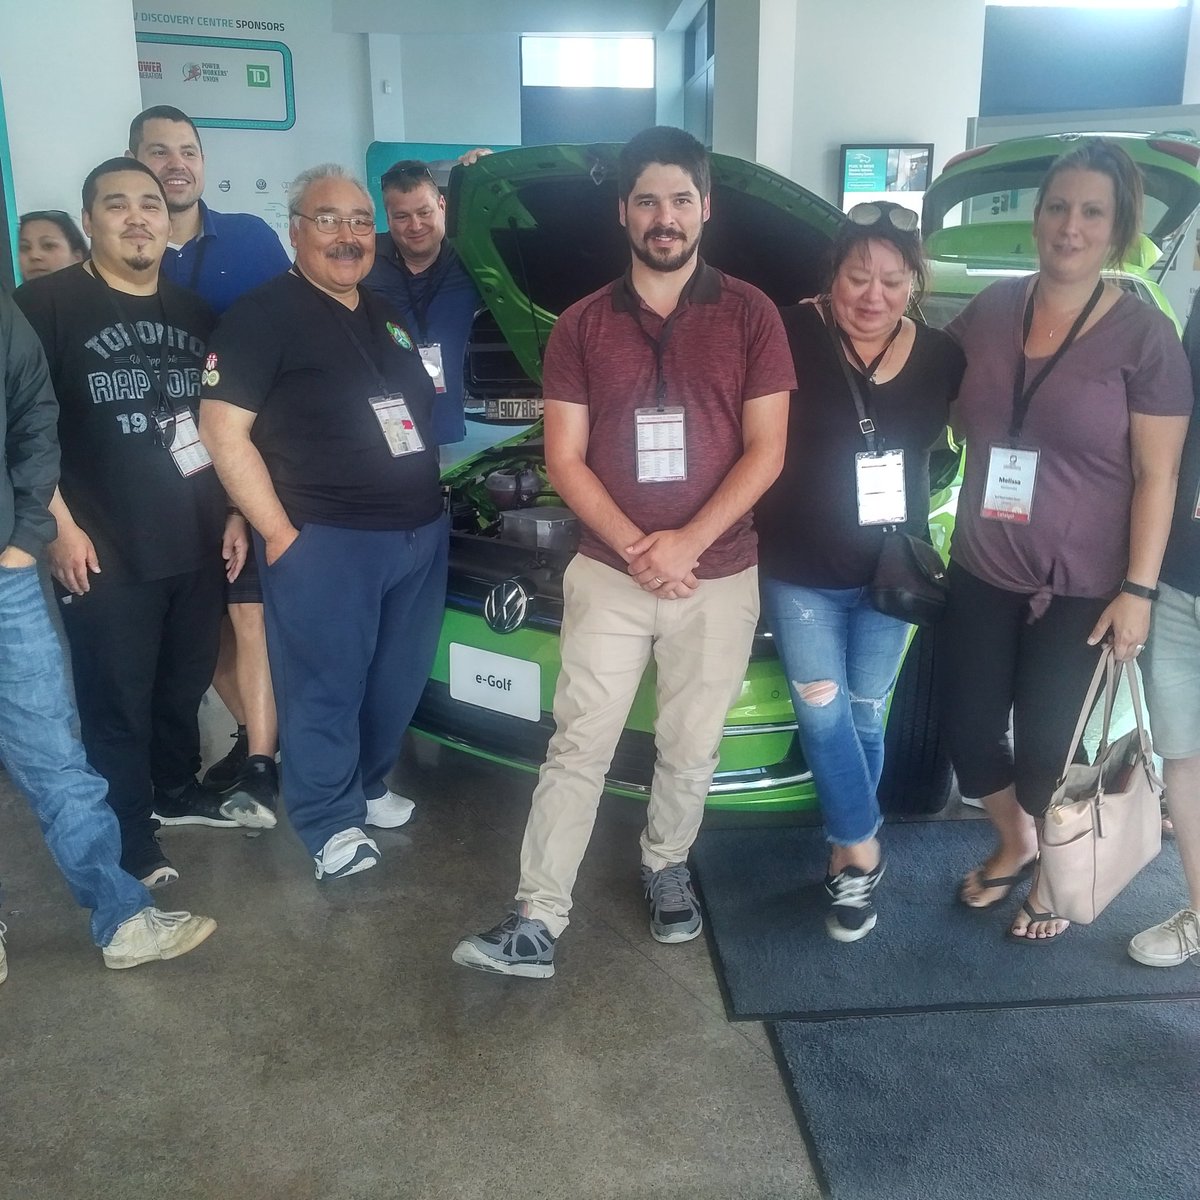 Vroom, Vroom, @2020Catalysts @IndigClnEnergy at Plug 'N Drive Electric Vehicle Discovery Centre in Toronto, pushing the pedal to power clean driving for Indigenous communities